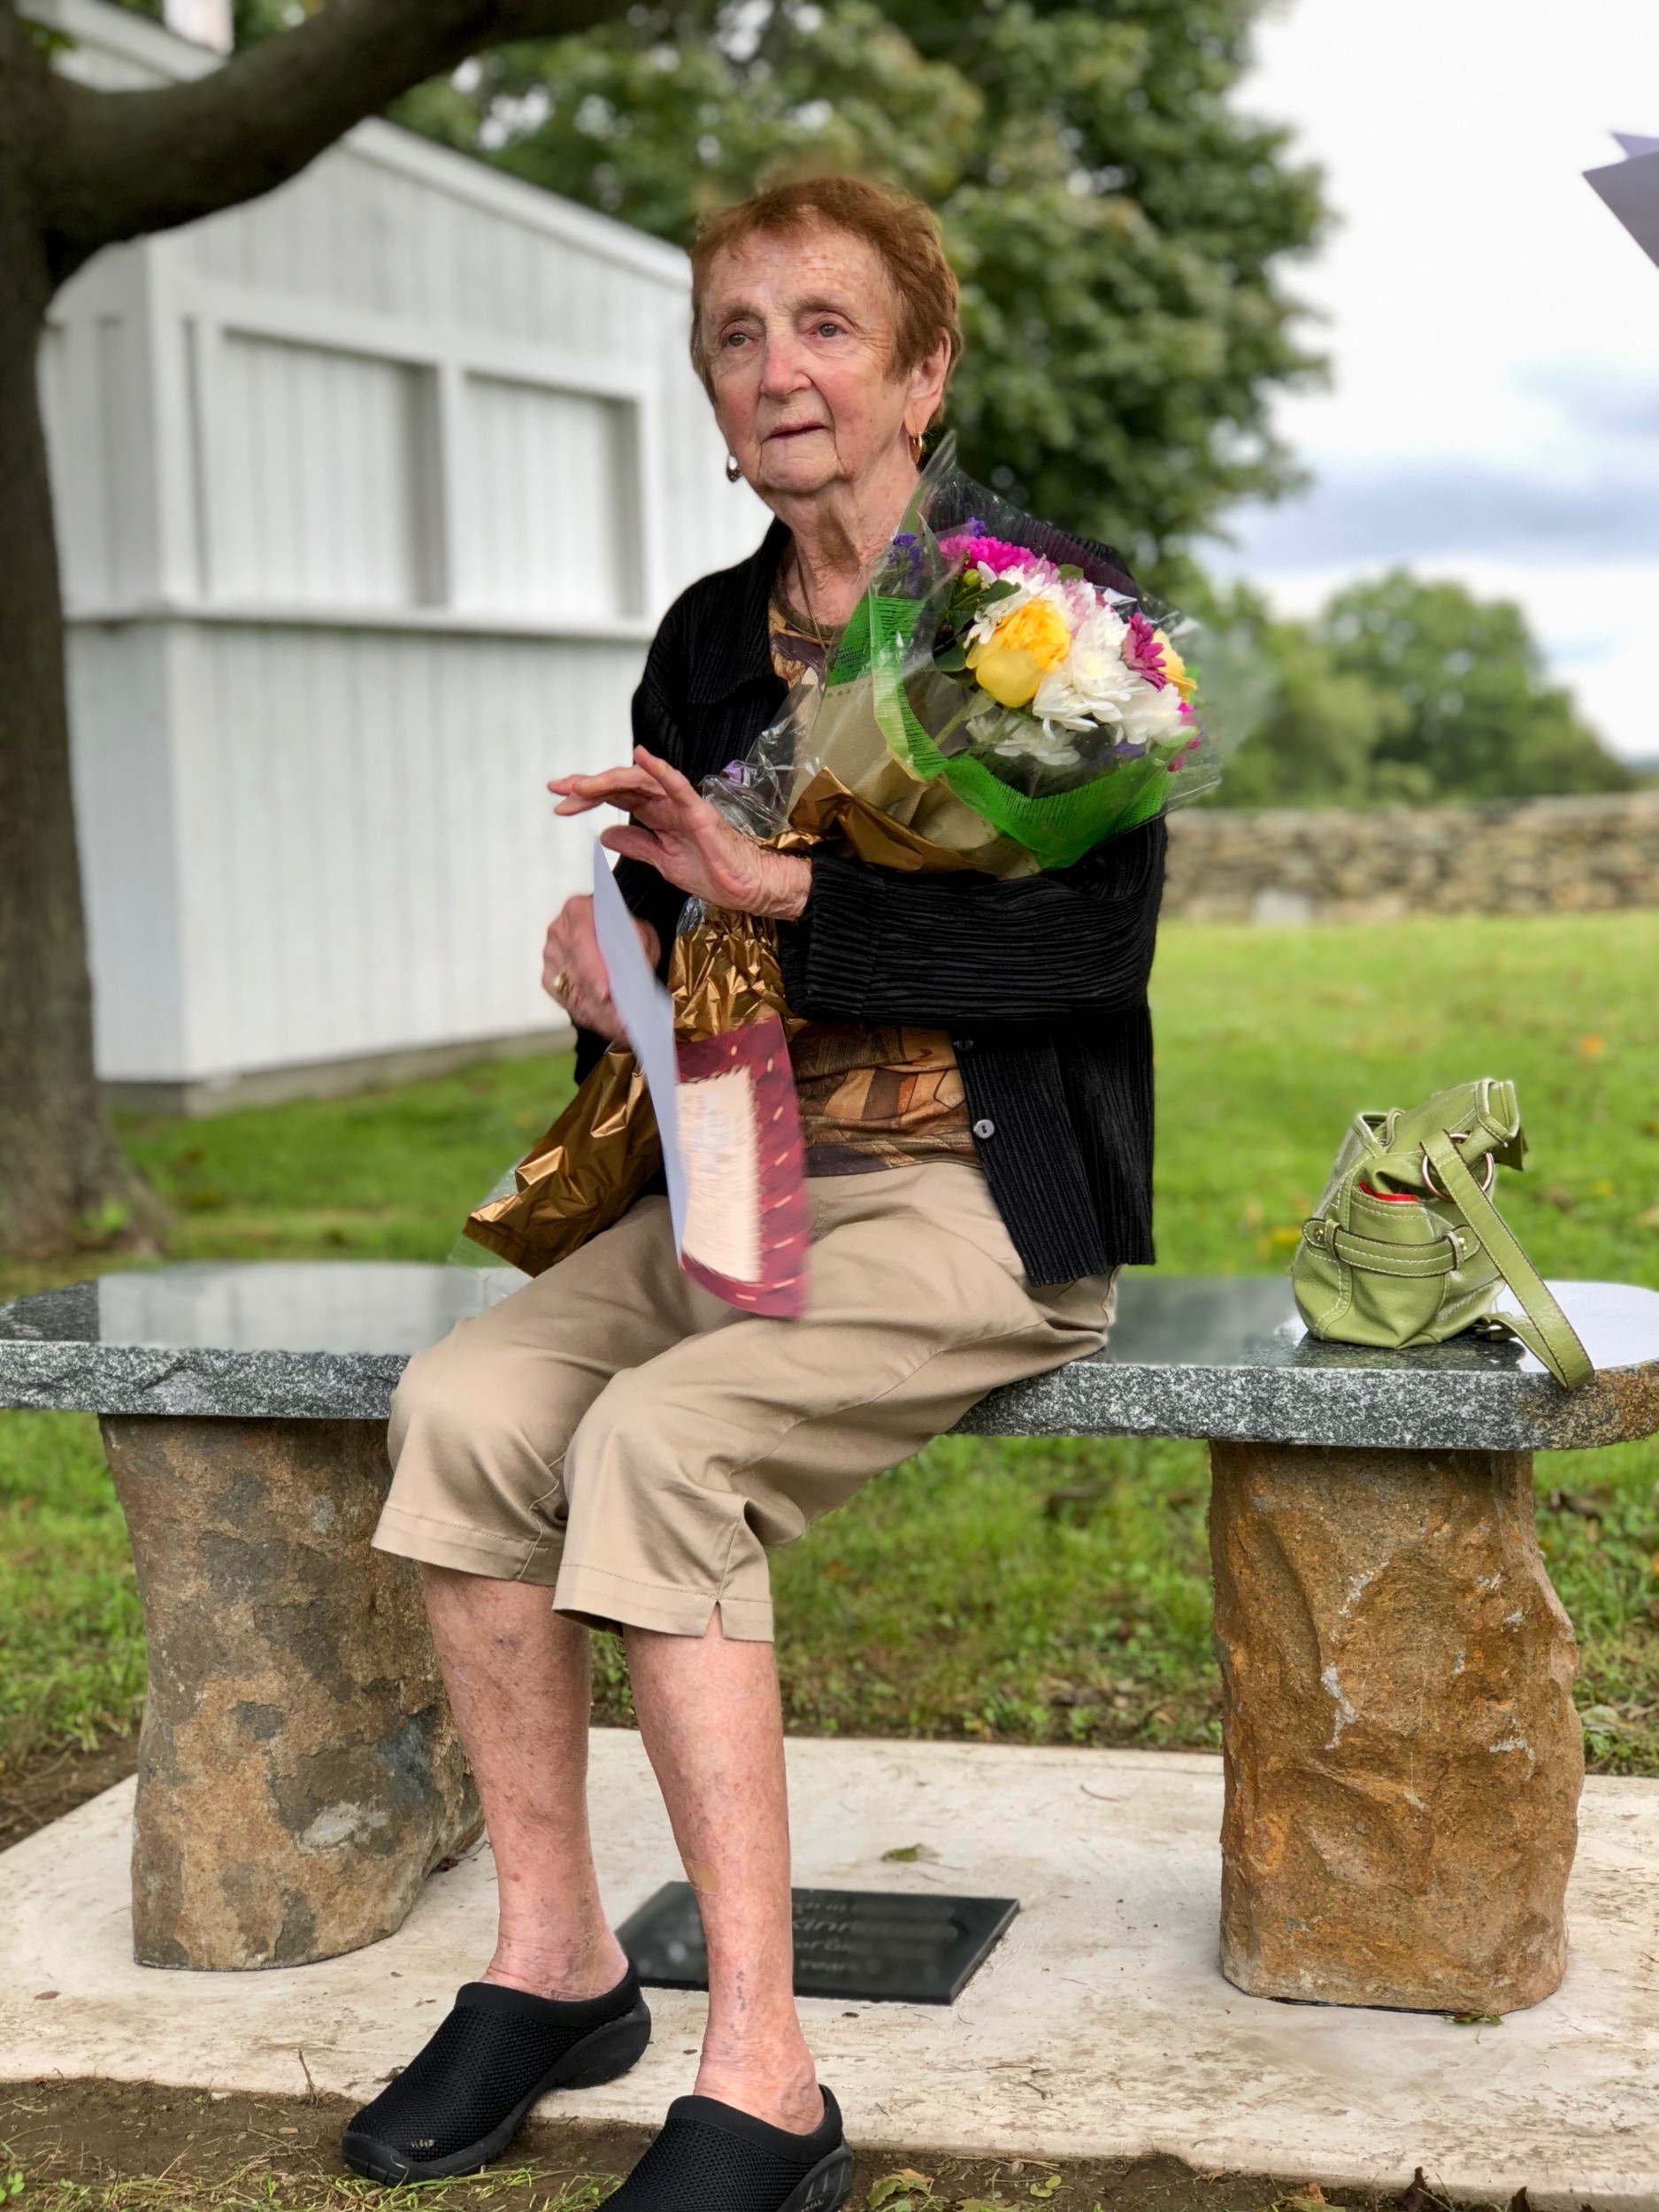 Grace Kinnunen sits on a bench that was dedicated in her honor during a ceremony at Glen Park on Thursday, Sept. 20. A plaque at its base calls Ms. Kinnunen a “champion of Glen Park for many years.”